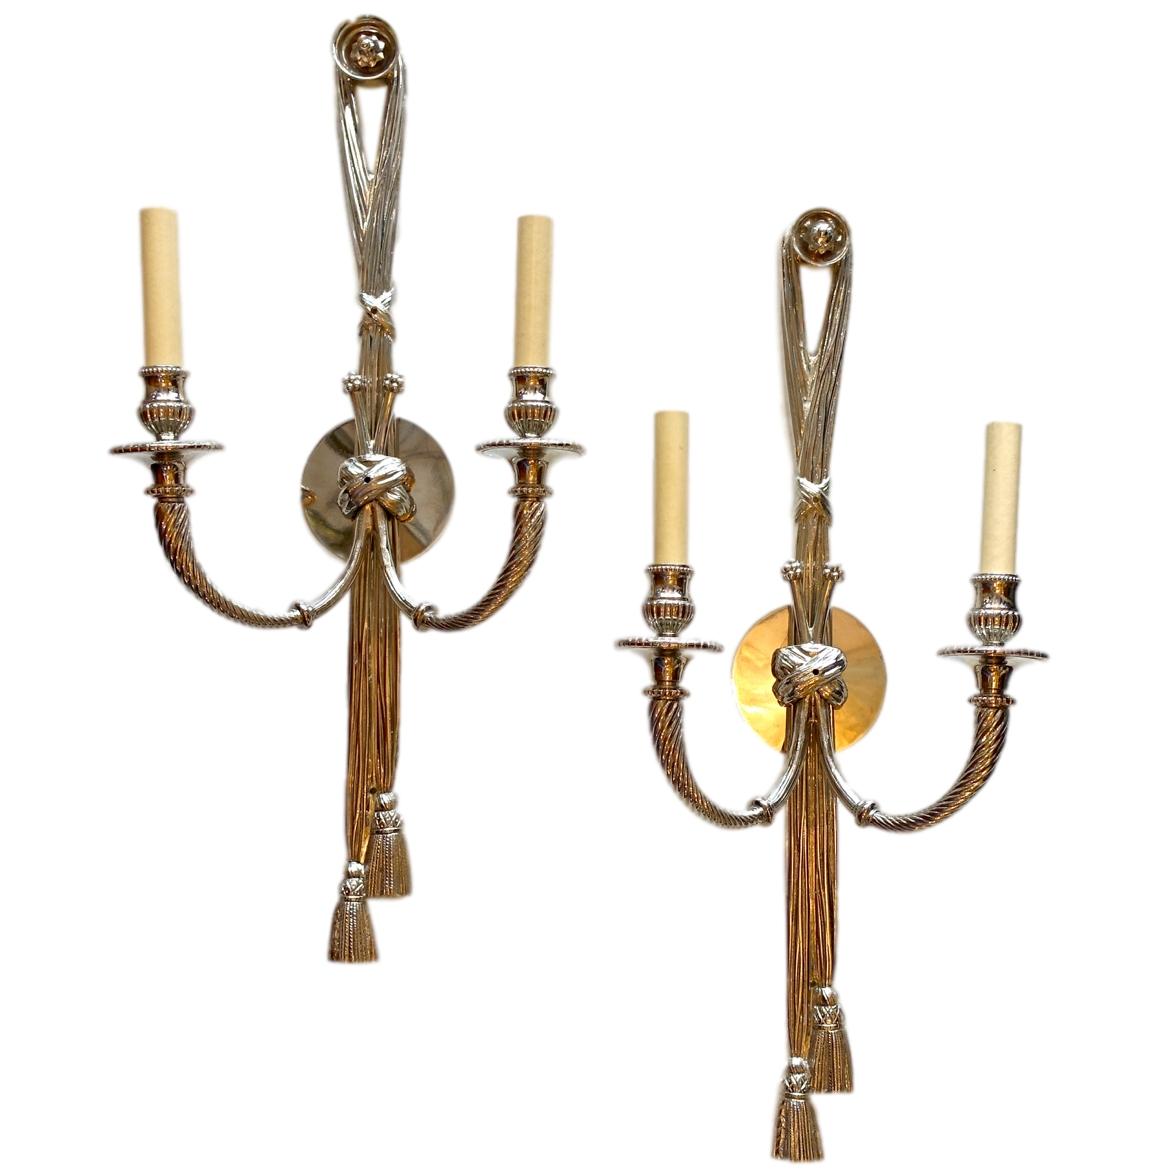 Set of Large Nickel-Plated Neoclassic Sconces, Sold per Pair